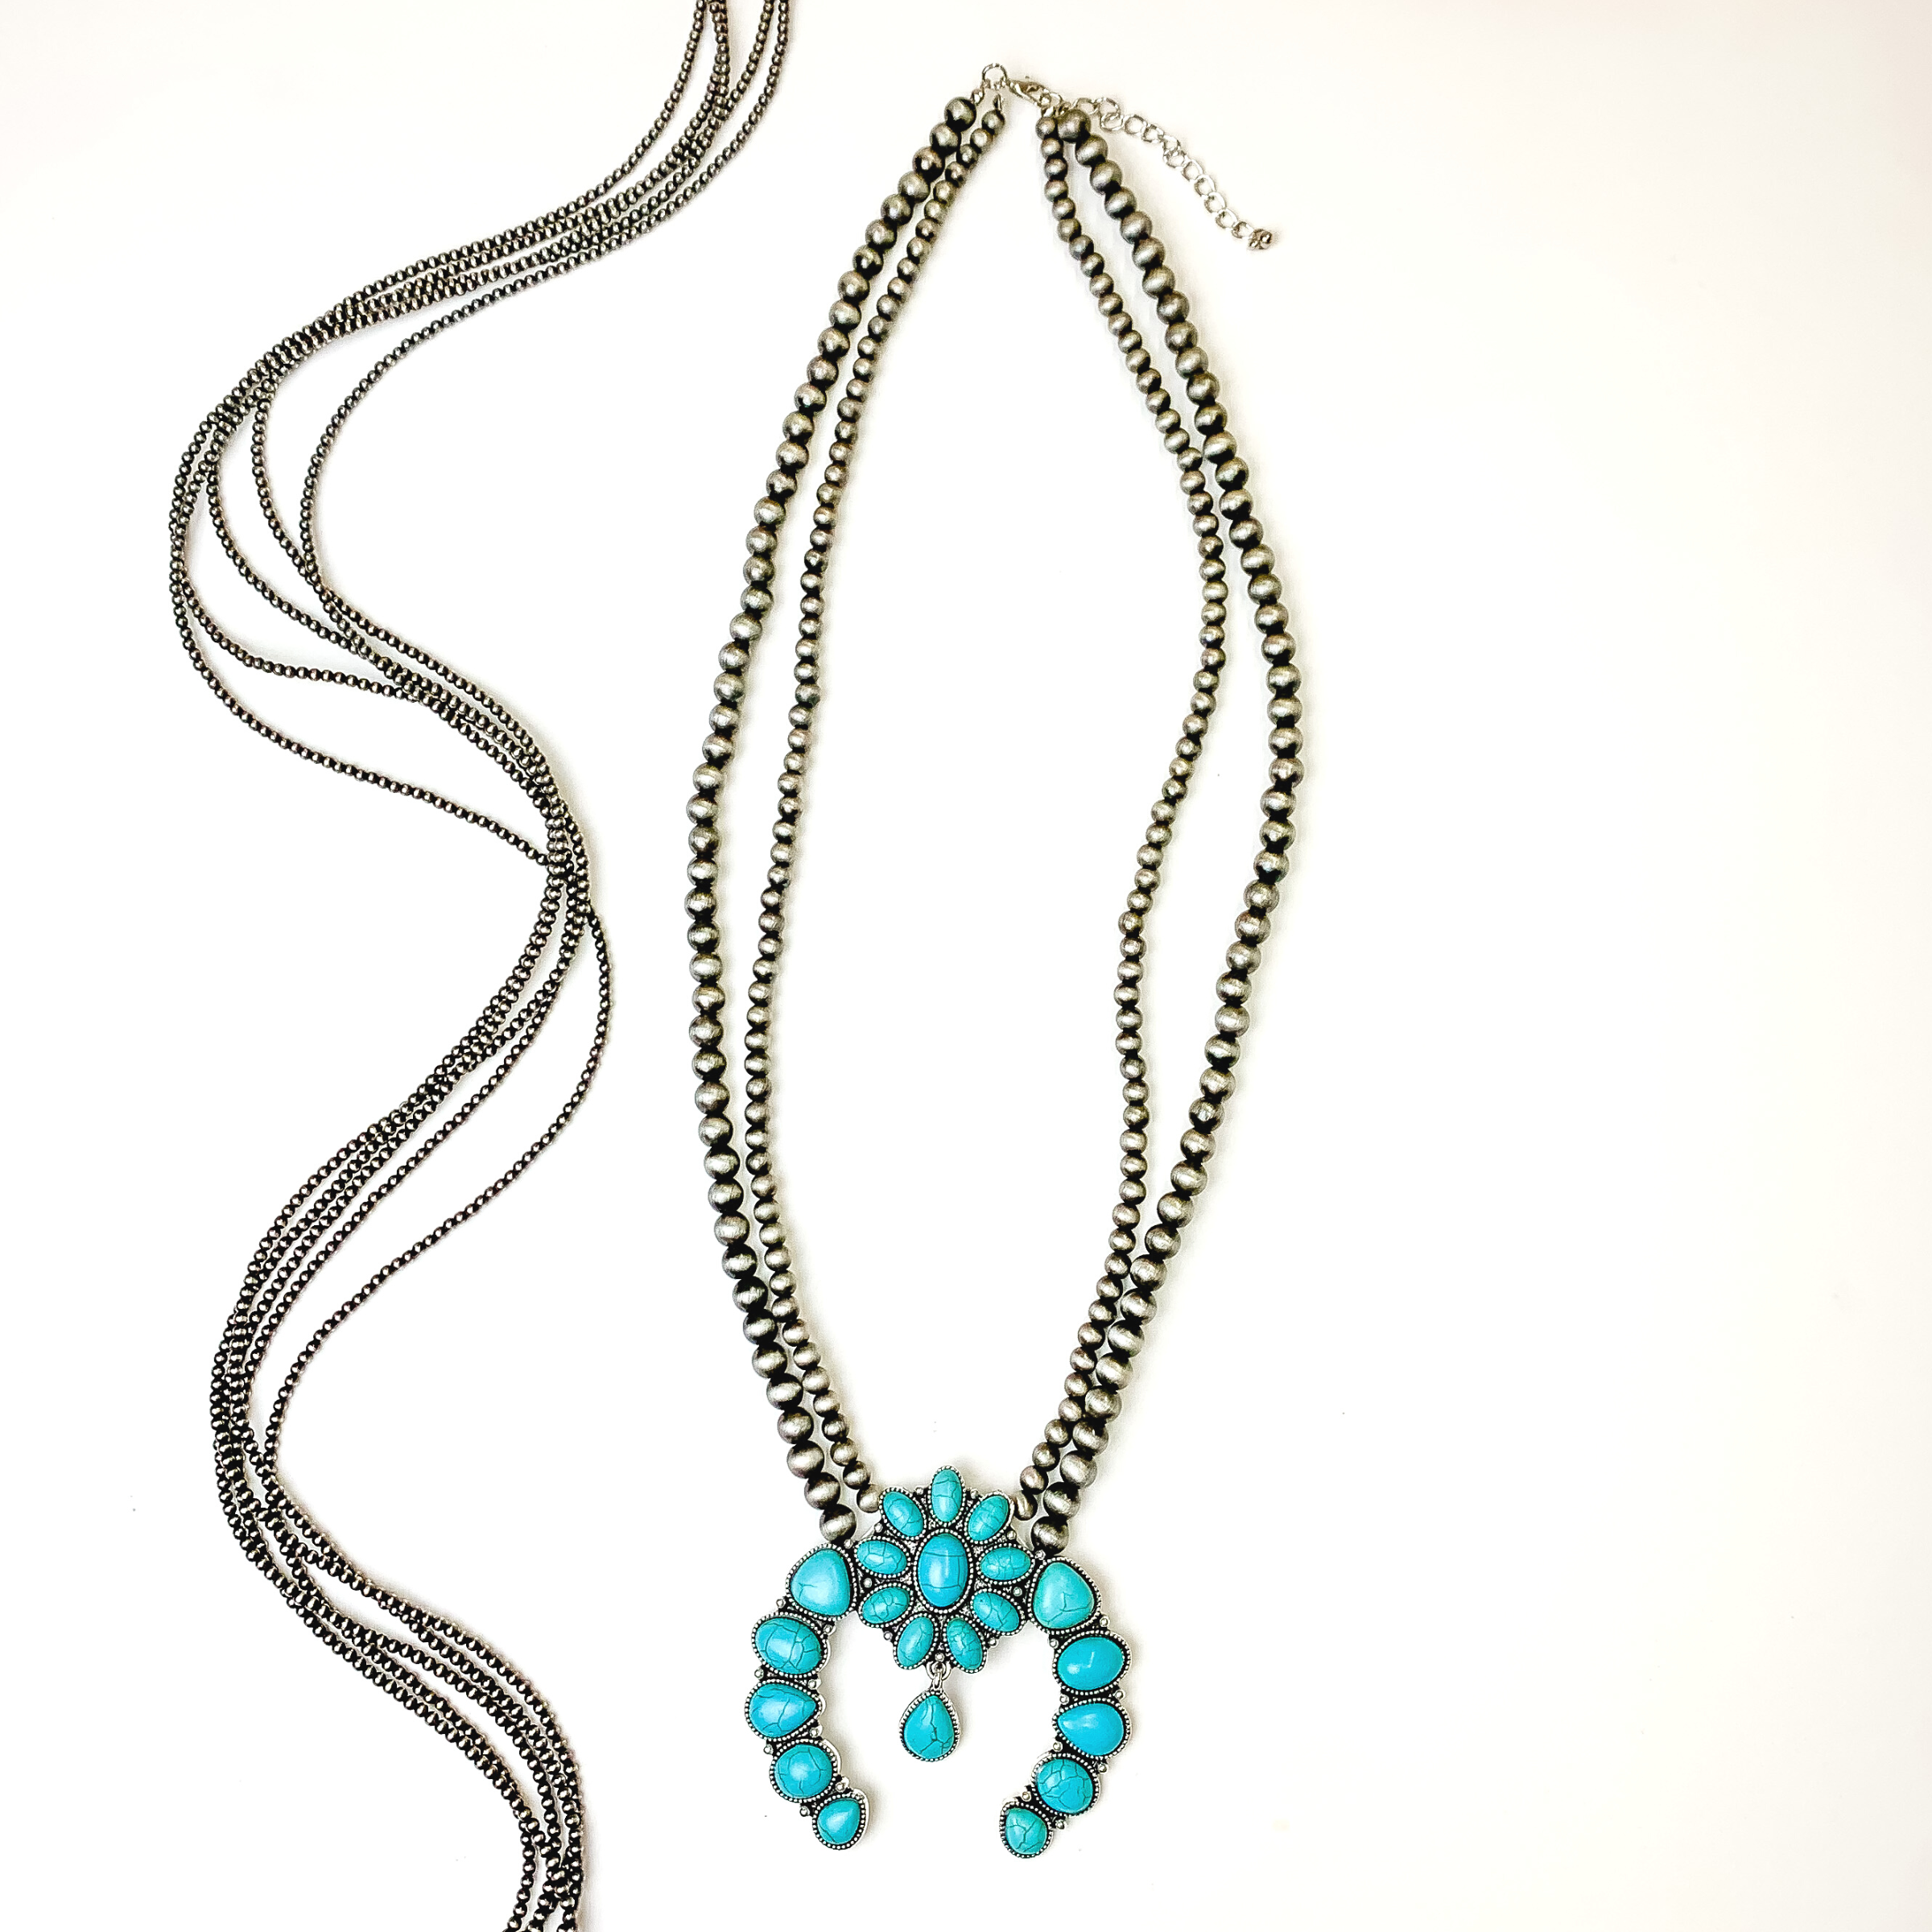 Turquoise and Silver Oval Squash Flower Necklace - Giddy Up Glamour Boutique